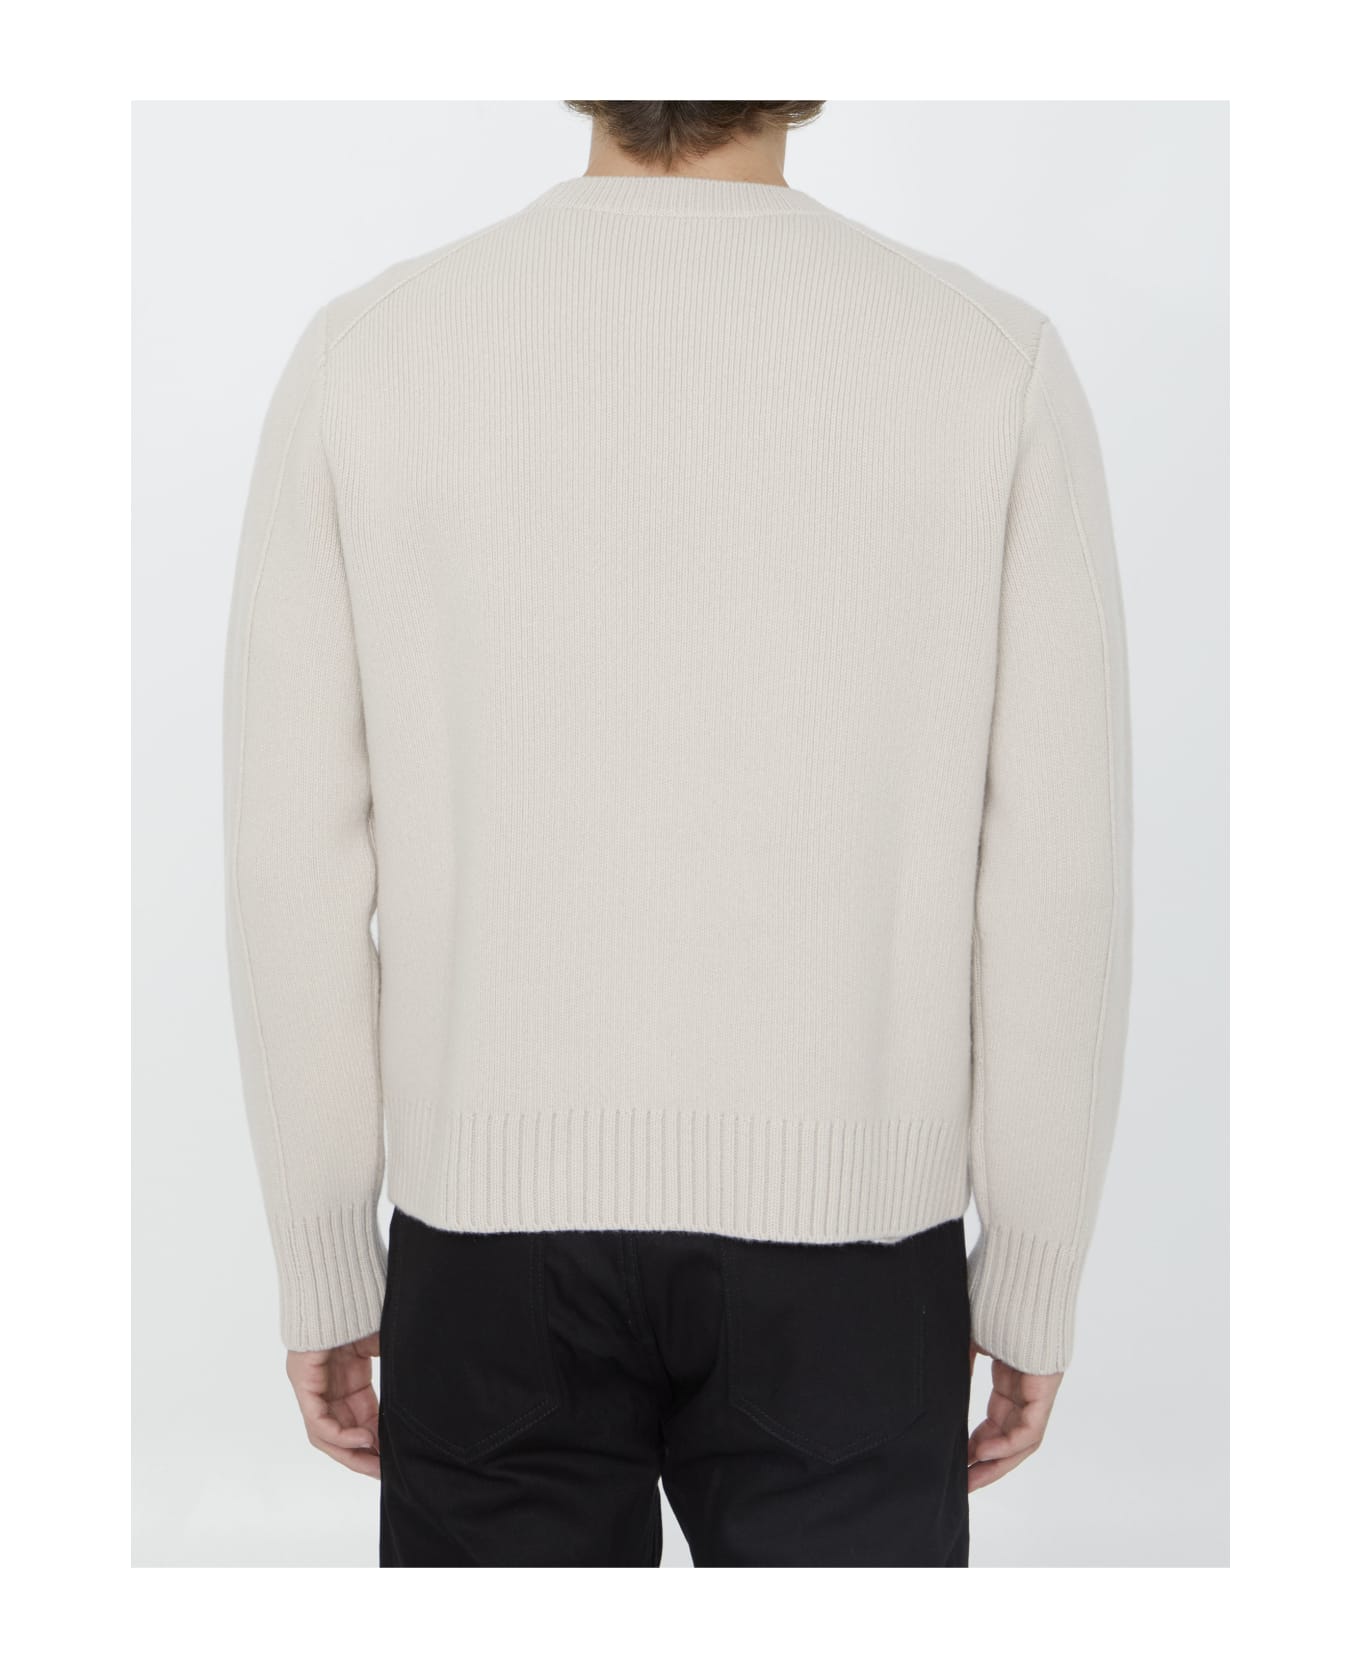 Lanvin Wool And Cashmere Sweater - CREAM